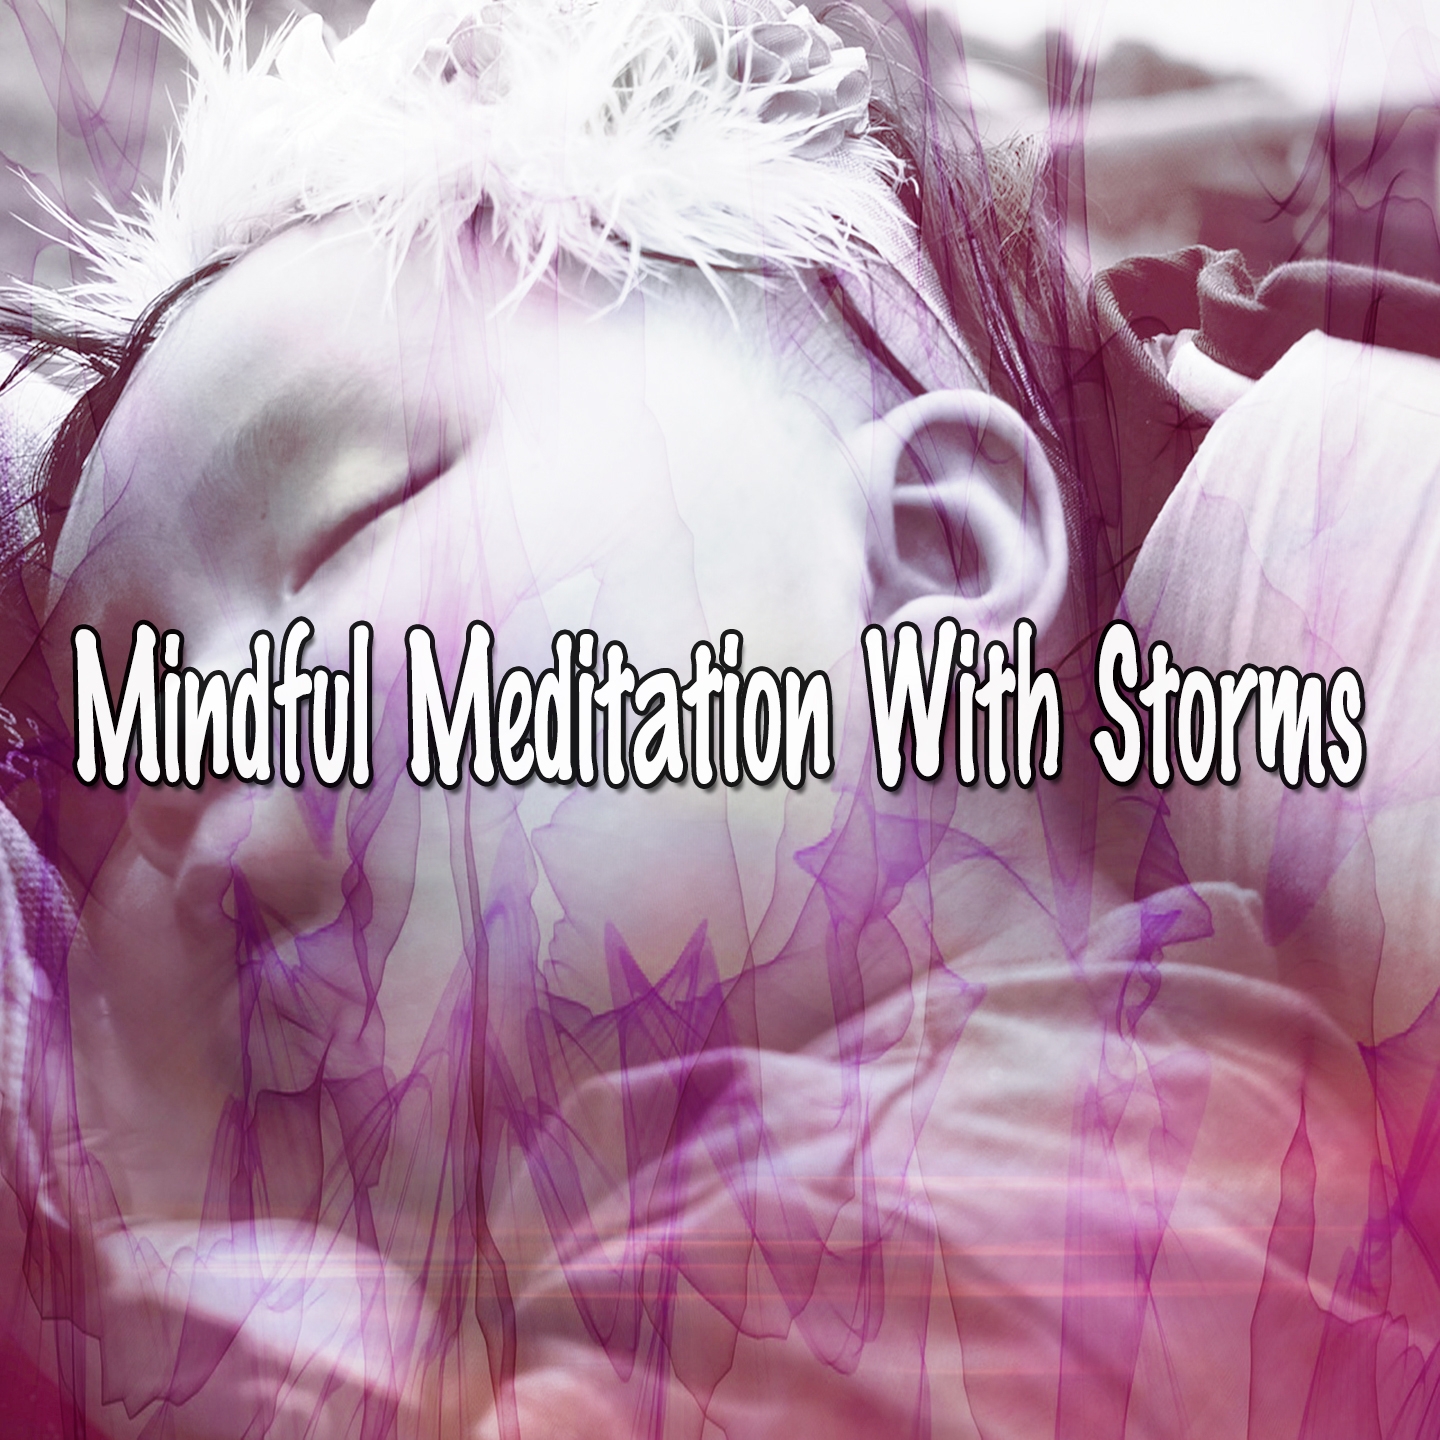 Mindful Meditation With Storms